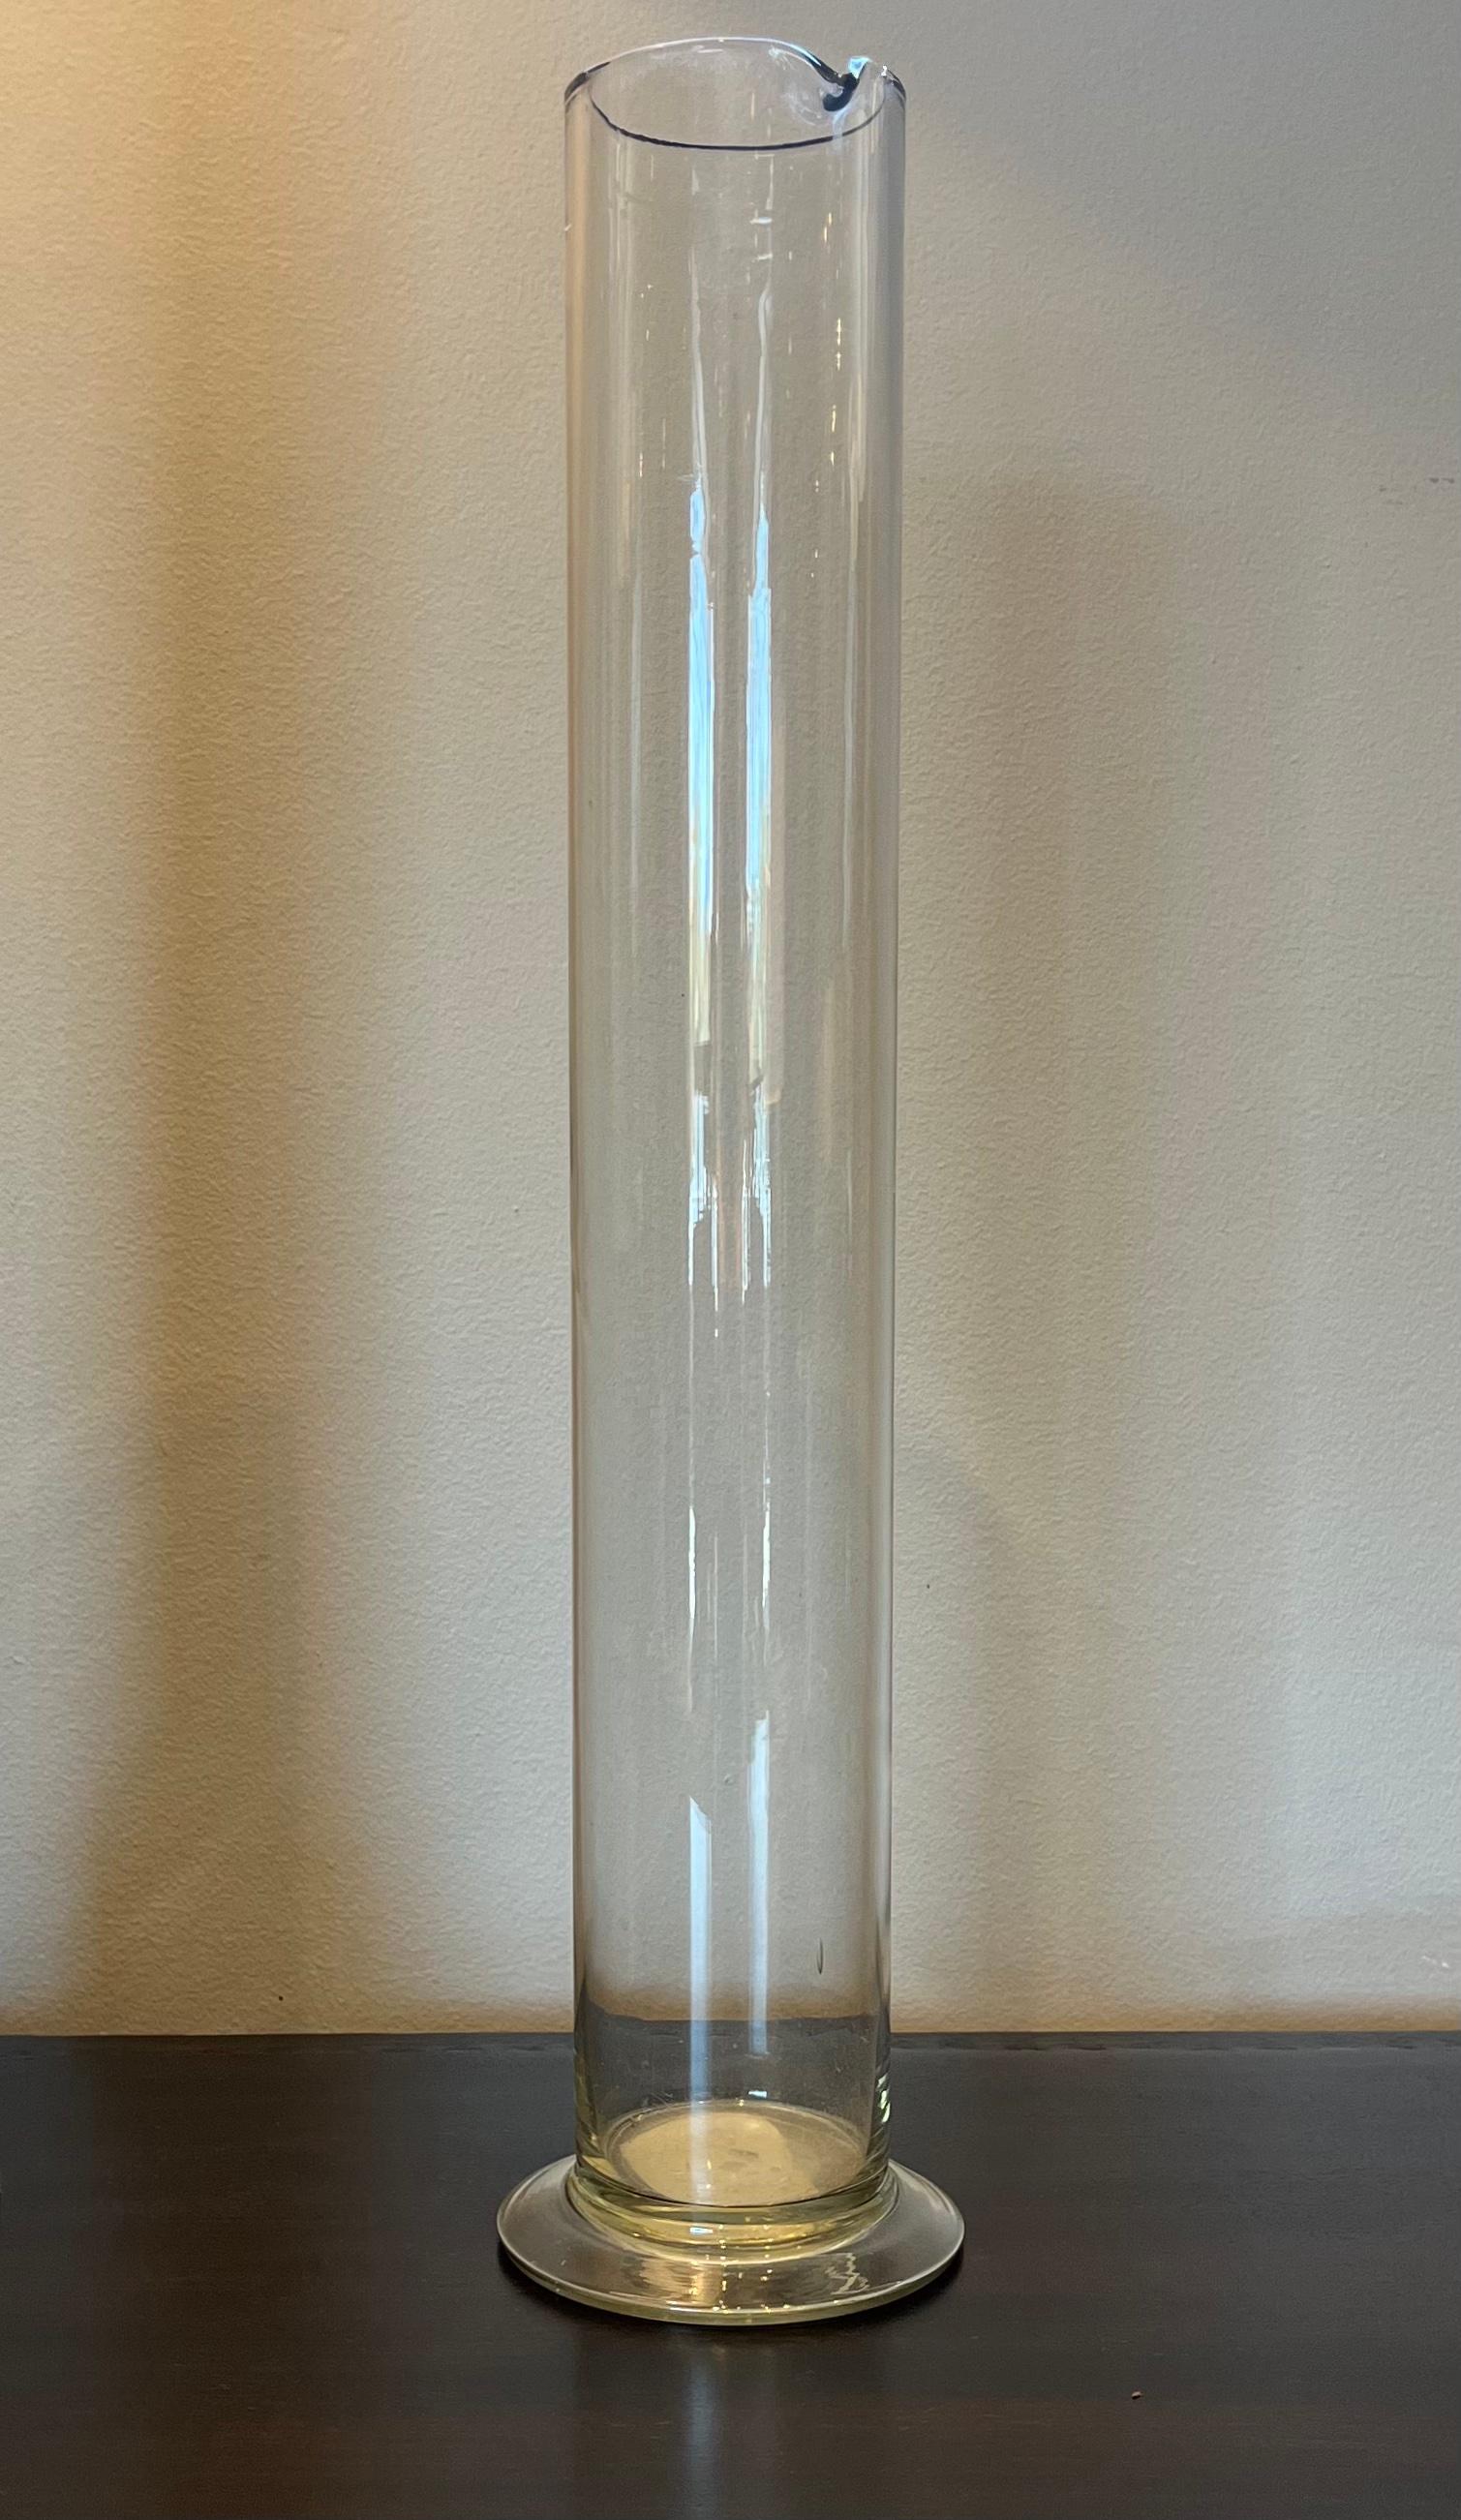 Glass chemist's beaker from 1900s France. Resting on a slim circular base, the cylindrical body is crowned with a pour spout rim. An excellent example of an early scientific apparatus, the vessel could be used as a vase, or as a unique decorative